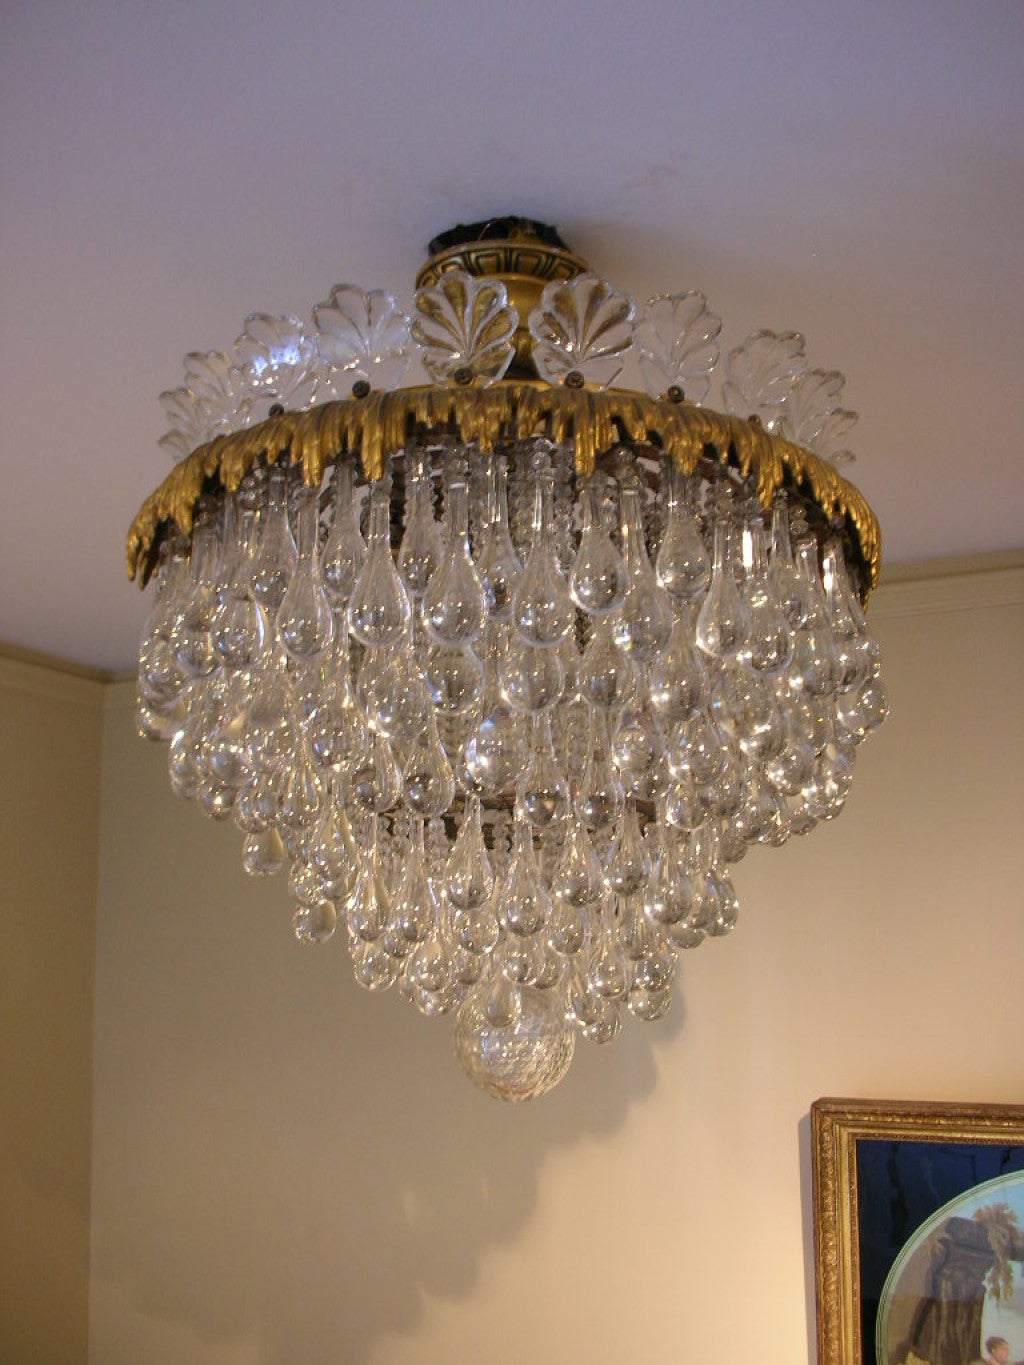 Fine crystal and bronze chandelier, the canope signed with a C in a diamond lozenge. E. F. Caldwell was a fine New York lighting manufacturer from the end of the 19th and beginning of the 20th century. They supplied the lighting for the Waldorf